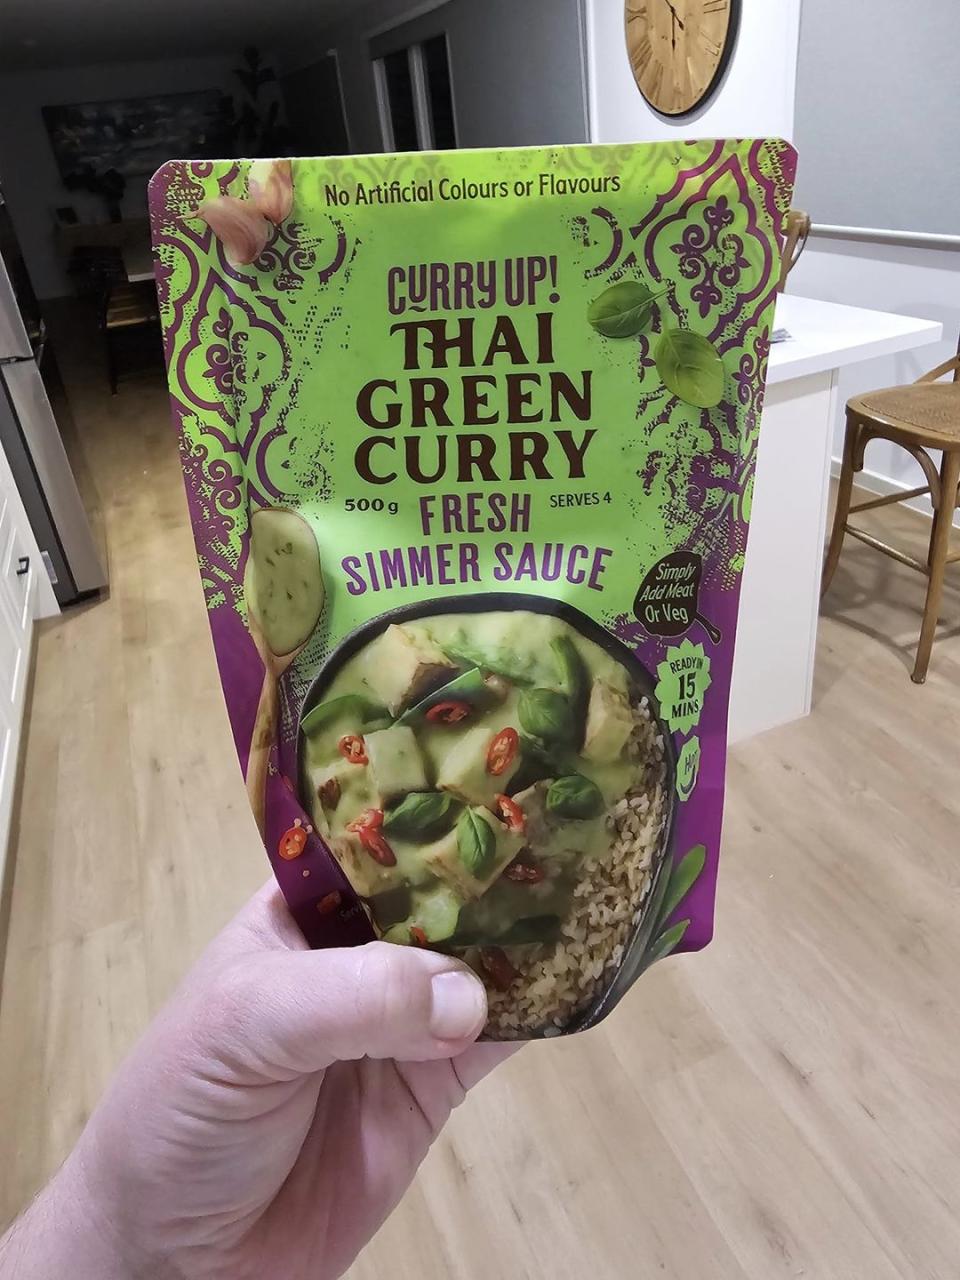 The Thai Green Curry Simmer Sauce was a hit. Credit: Facebook 